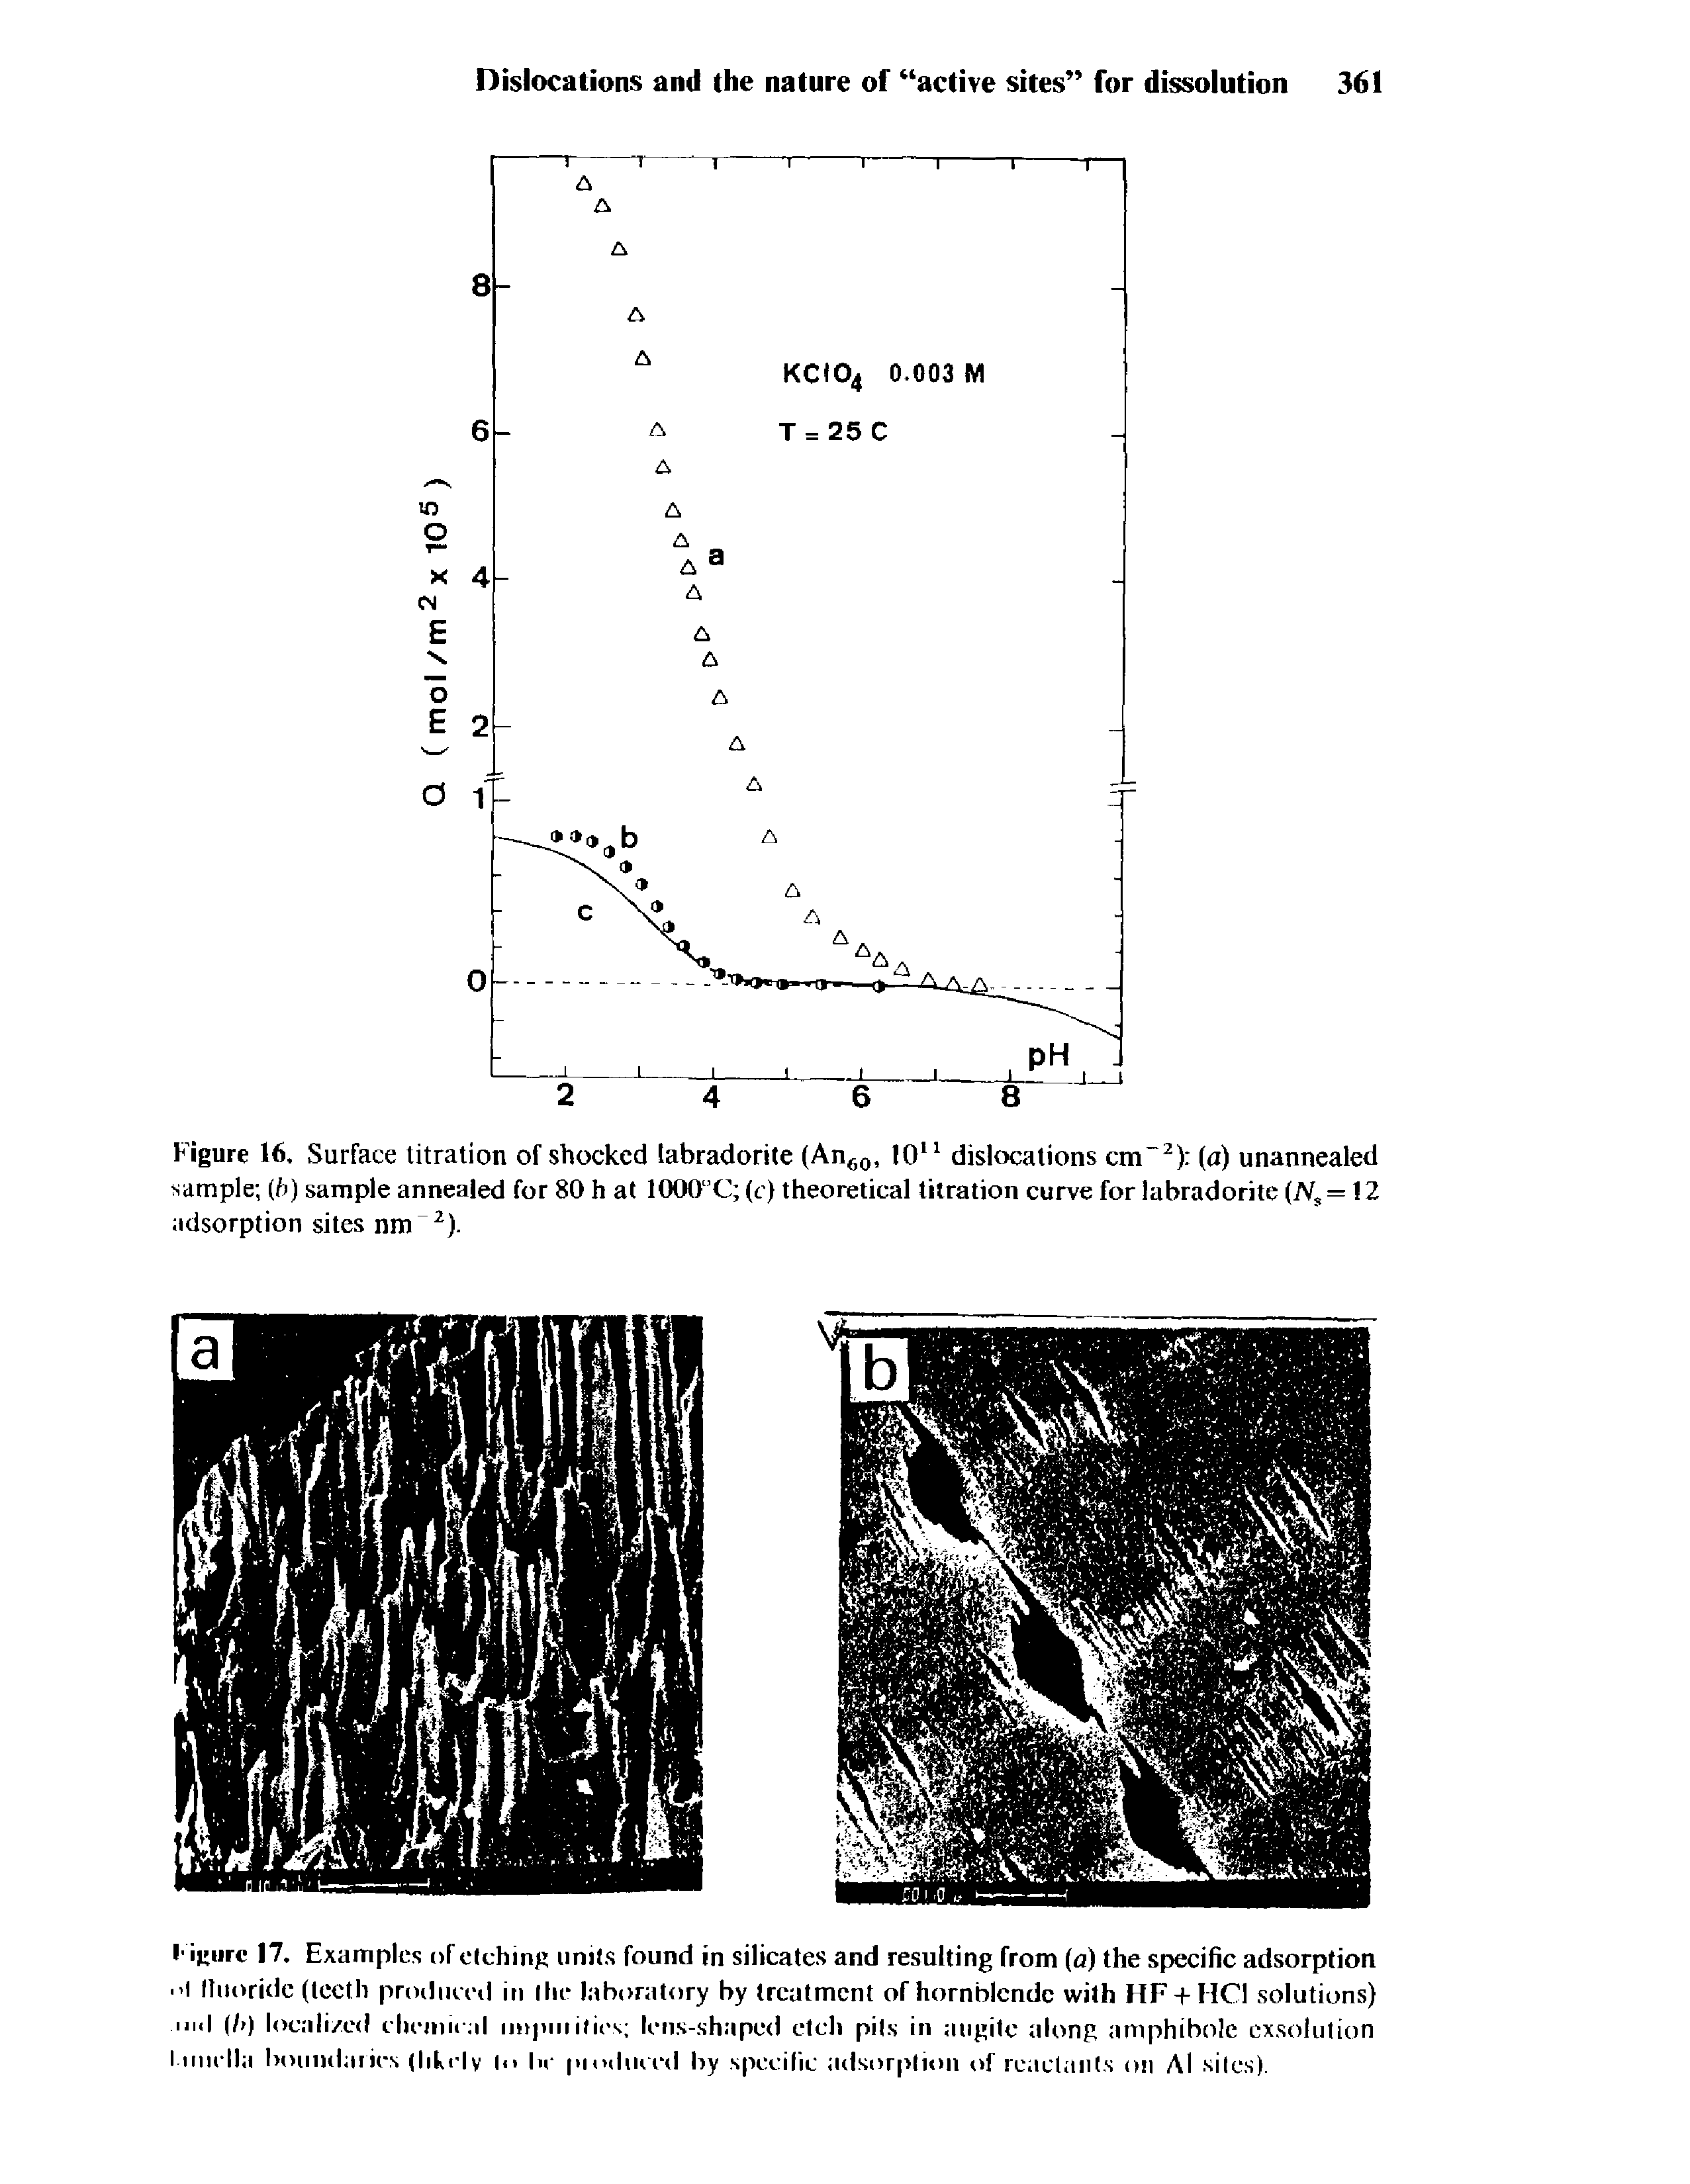 Figure 17. Examples of etching units found in silicates and resulting from (a) the specific adsorption >l fluoride (teeth produced in the laboratory by treatment of hornblende with HF + HC1 solutions) mil (/>) localized chemical impmdies lens-shaped etch pits in augitc along amphibole exsolution l-imcMa boumlaries (likely l<> be pioduccd by specific adsorption of reactants on Al sites).